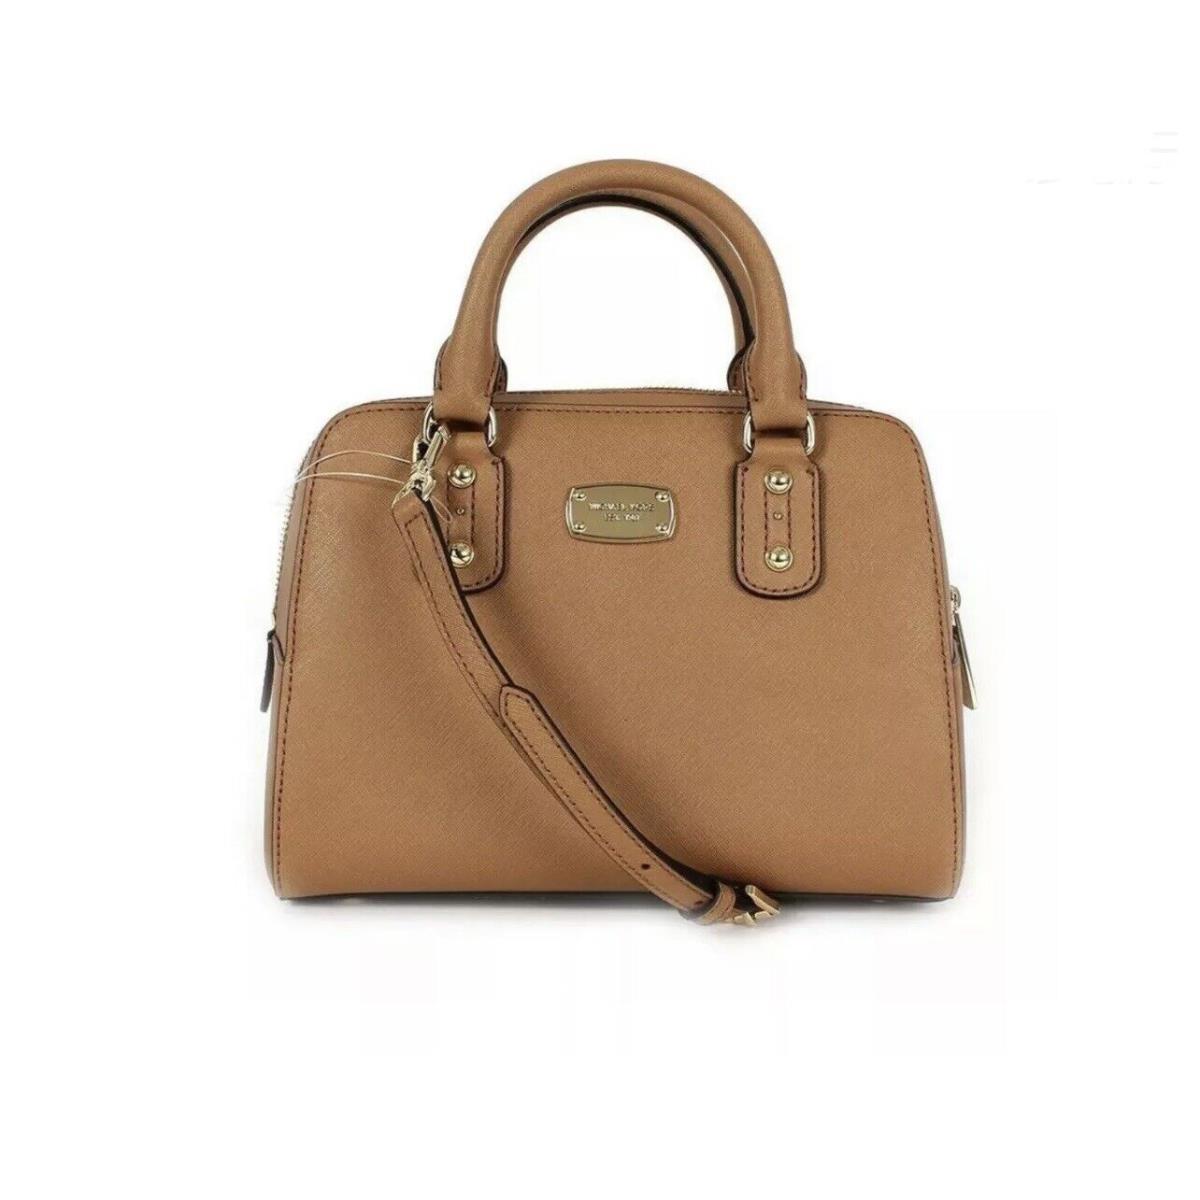 Buy the Michael Kors Tan Leather Purse | GoodwillFinds